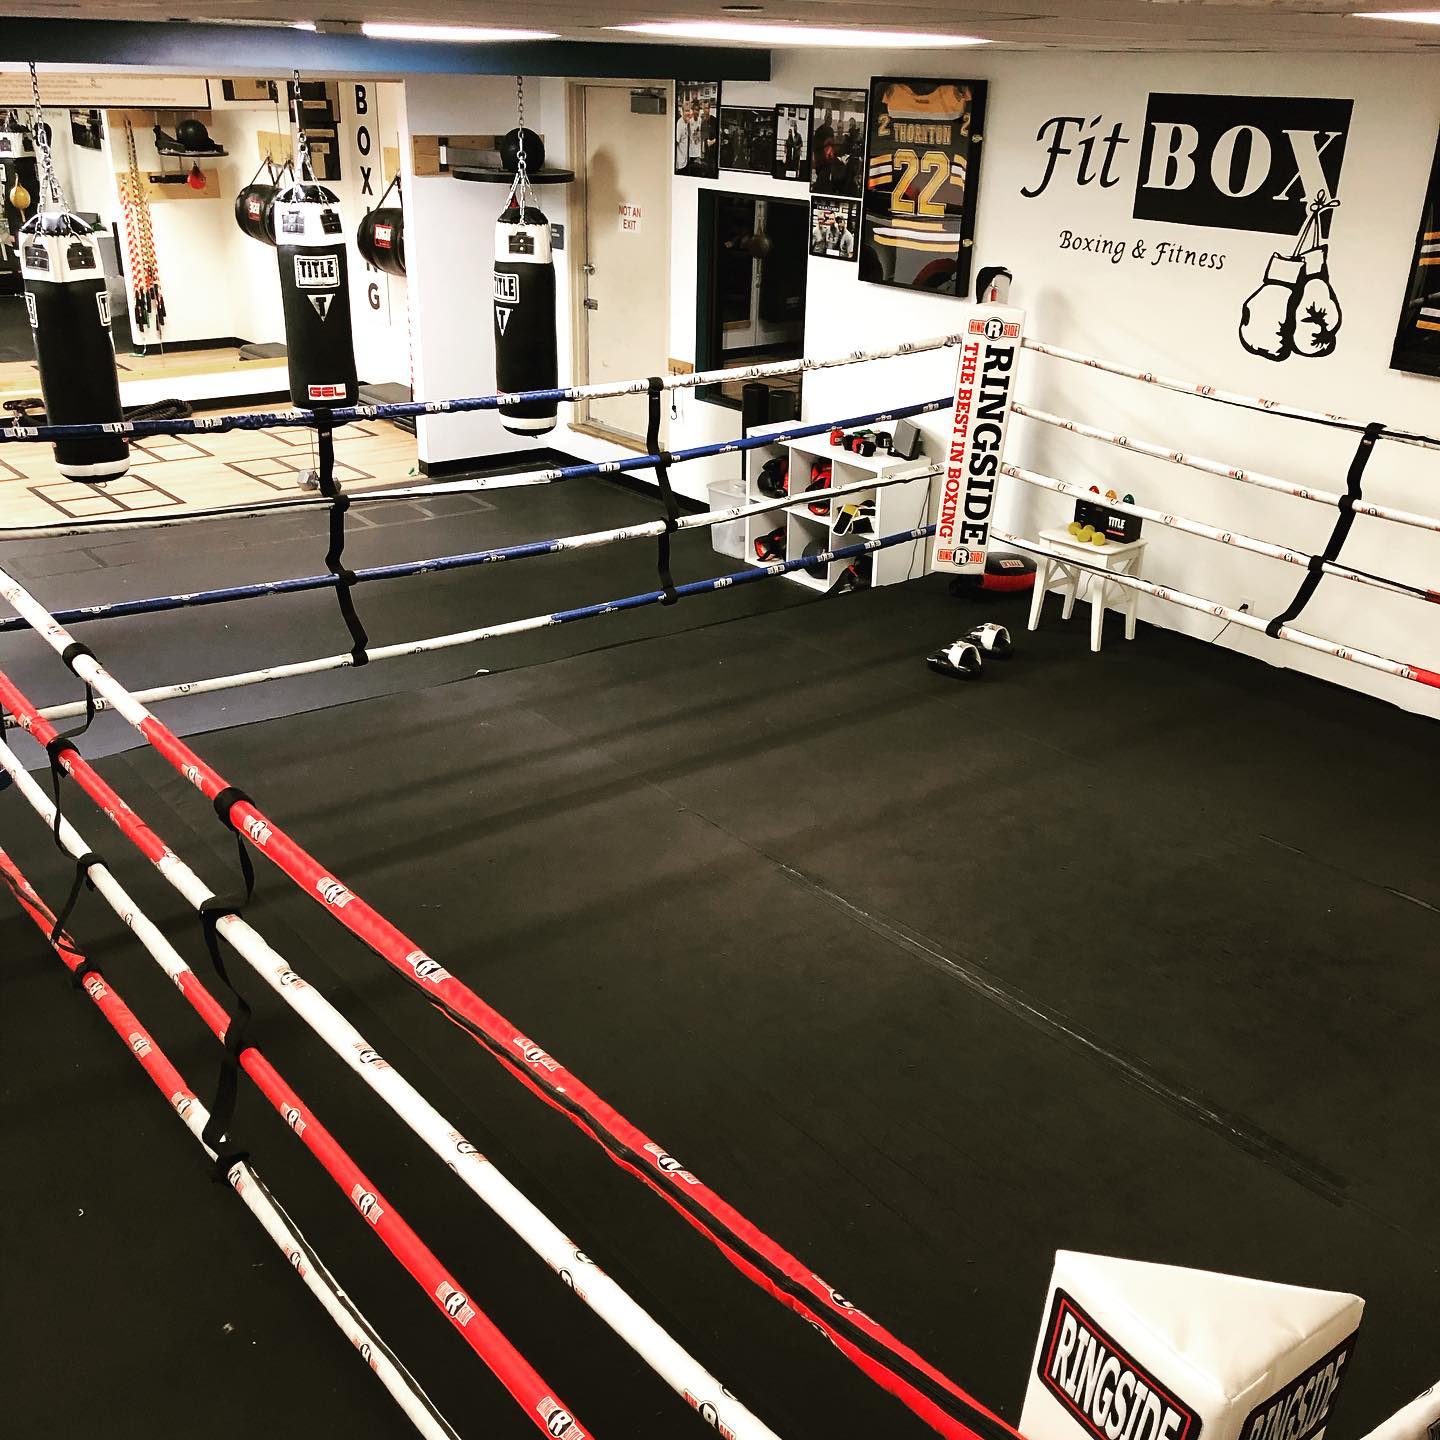 The future of large gyms and over-crowded group classes could be a thing of the past soon after this Pandemic. FItBOX is Boxing studio that has been social distancing since we opened 7 yrs ago . We are a 1-on-1 Boxing studio that puts our clients through full body boxing workouts by appointment only. Owner @tommymcinerney has always felt you get more out of a 1-on-1 boxing workout then these large group classes that don’t focus on the correct form & technique that helps you get the best full body workout you can get. 
Soon we will get the ok from our Government to open up and we are looking forward to start letting your punches go and getting you that guaranteed sweat. For more info on finding out about our boxing studio and to sign up and try a free 1-on-1 boxing session contact us at FitBOX@outlook.com or call/text (781)727-9503. .